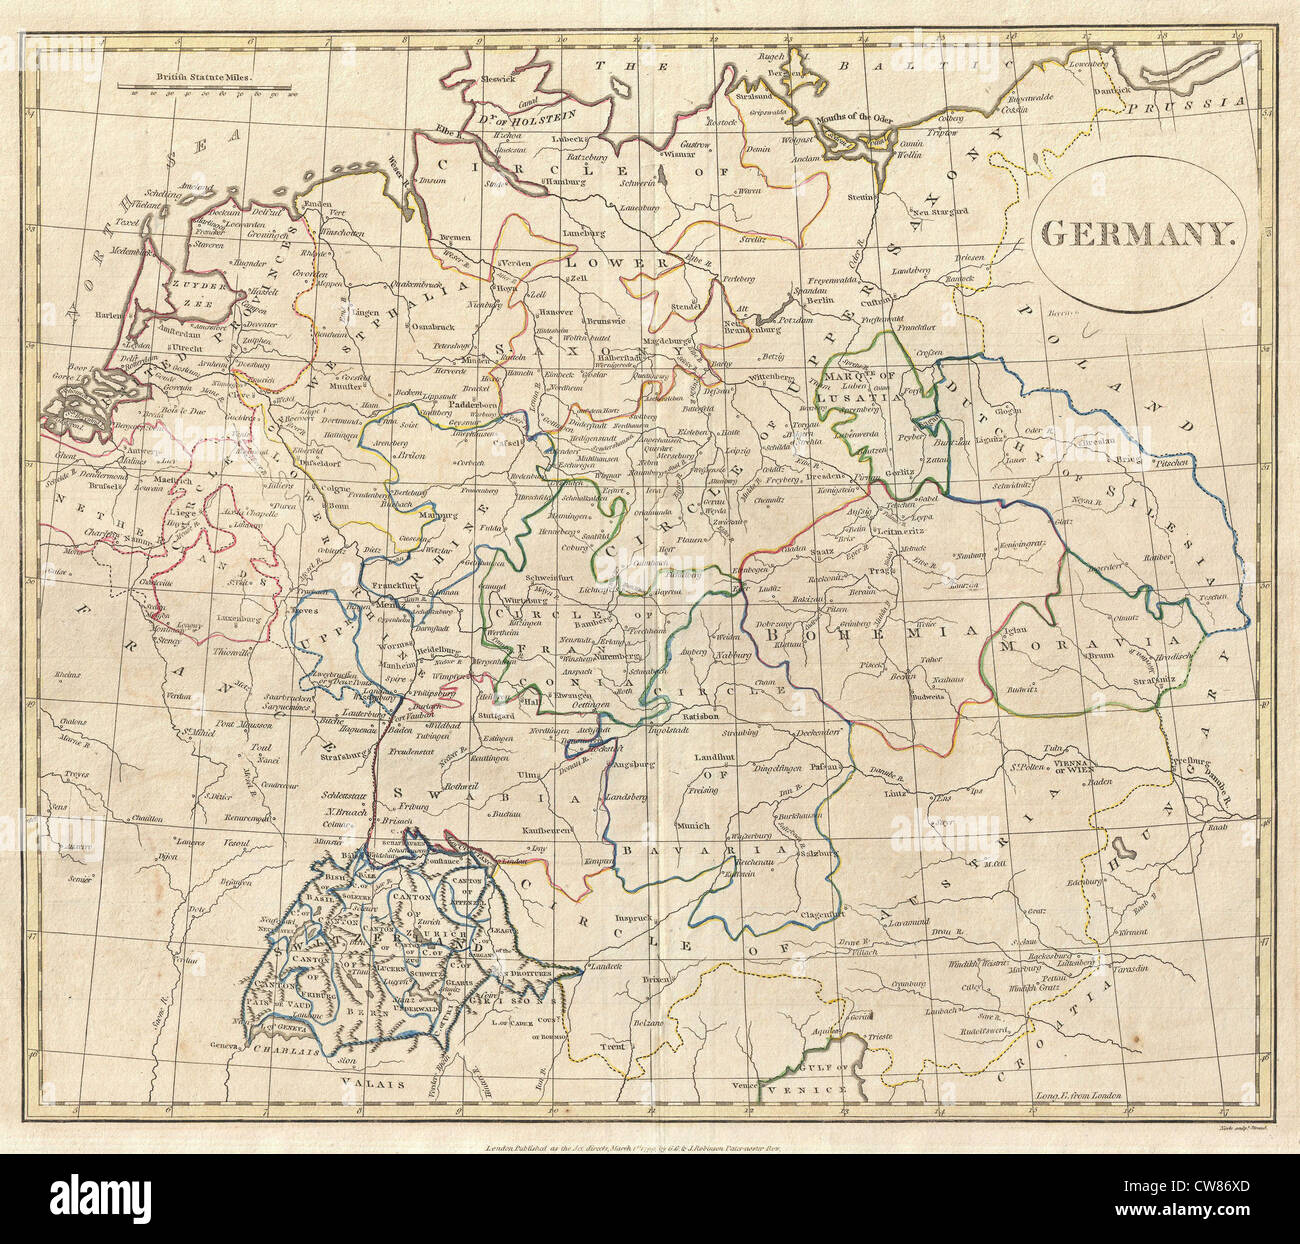 1799 Celement Cruttwell Map of Germany Stock Photo